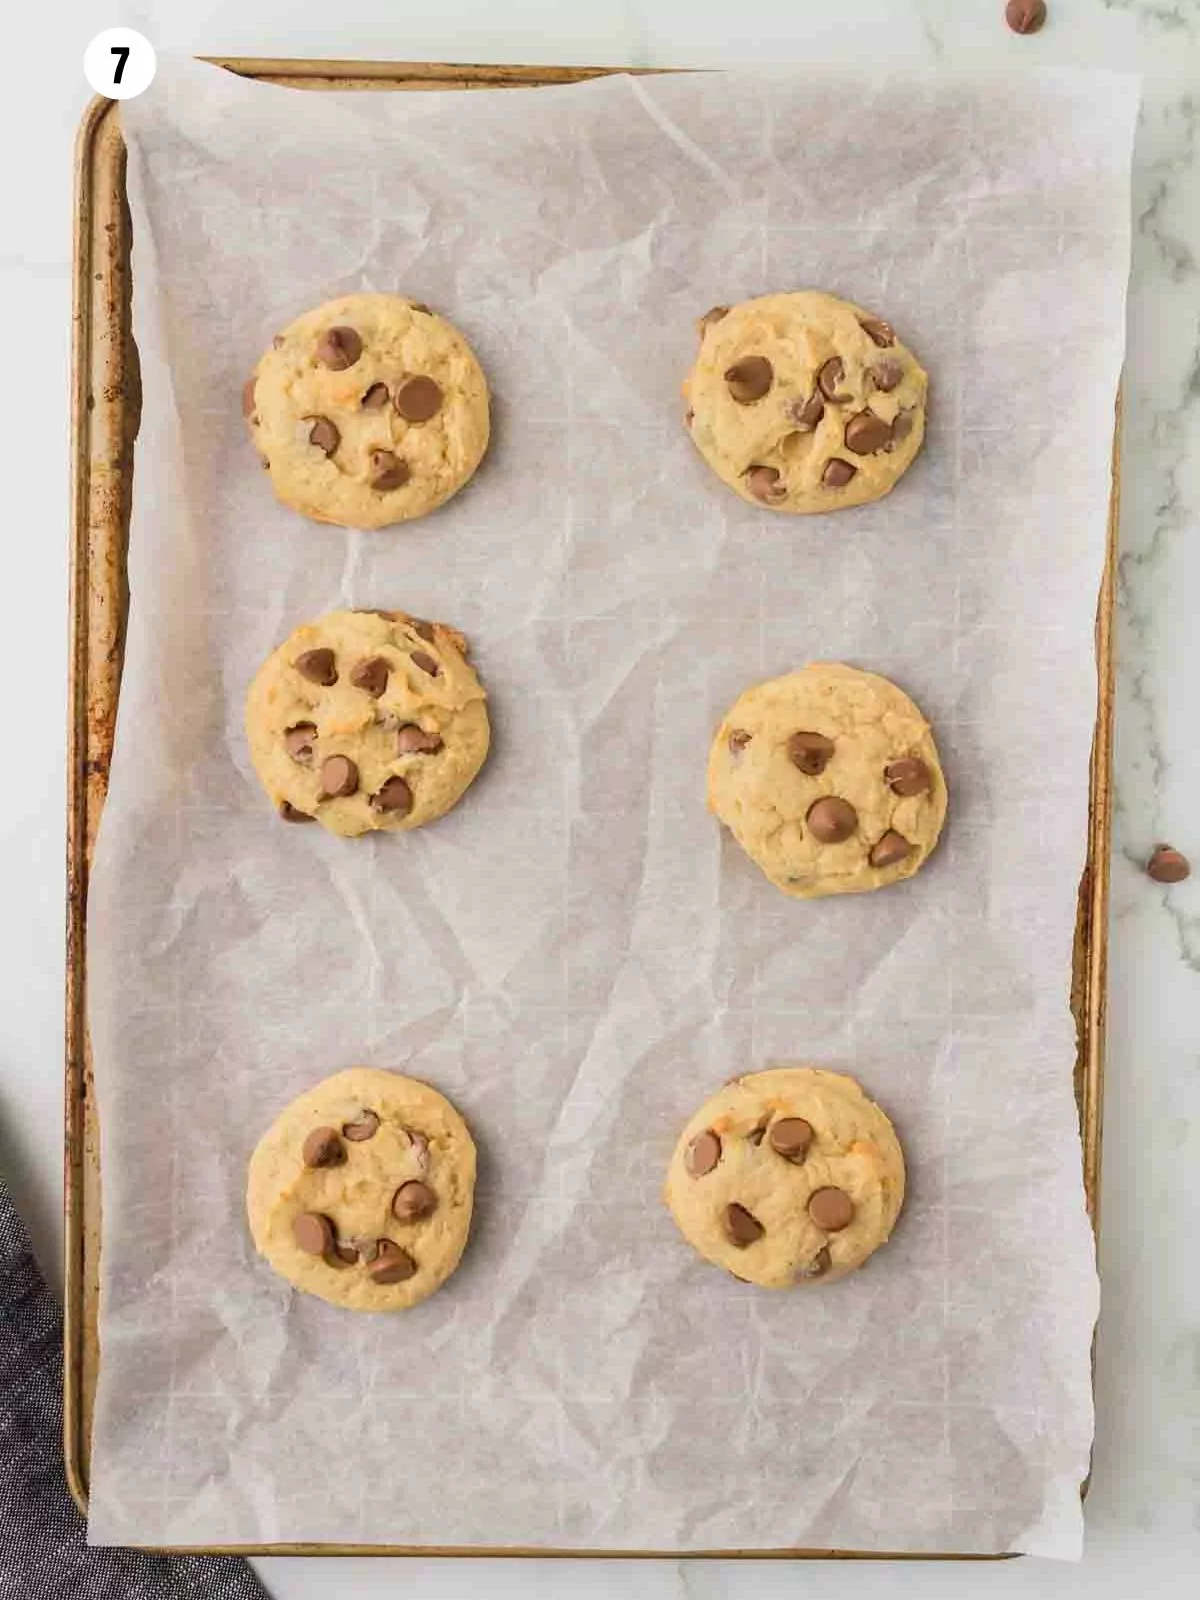 baked cookies on a parchment line baking sheet